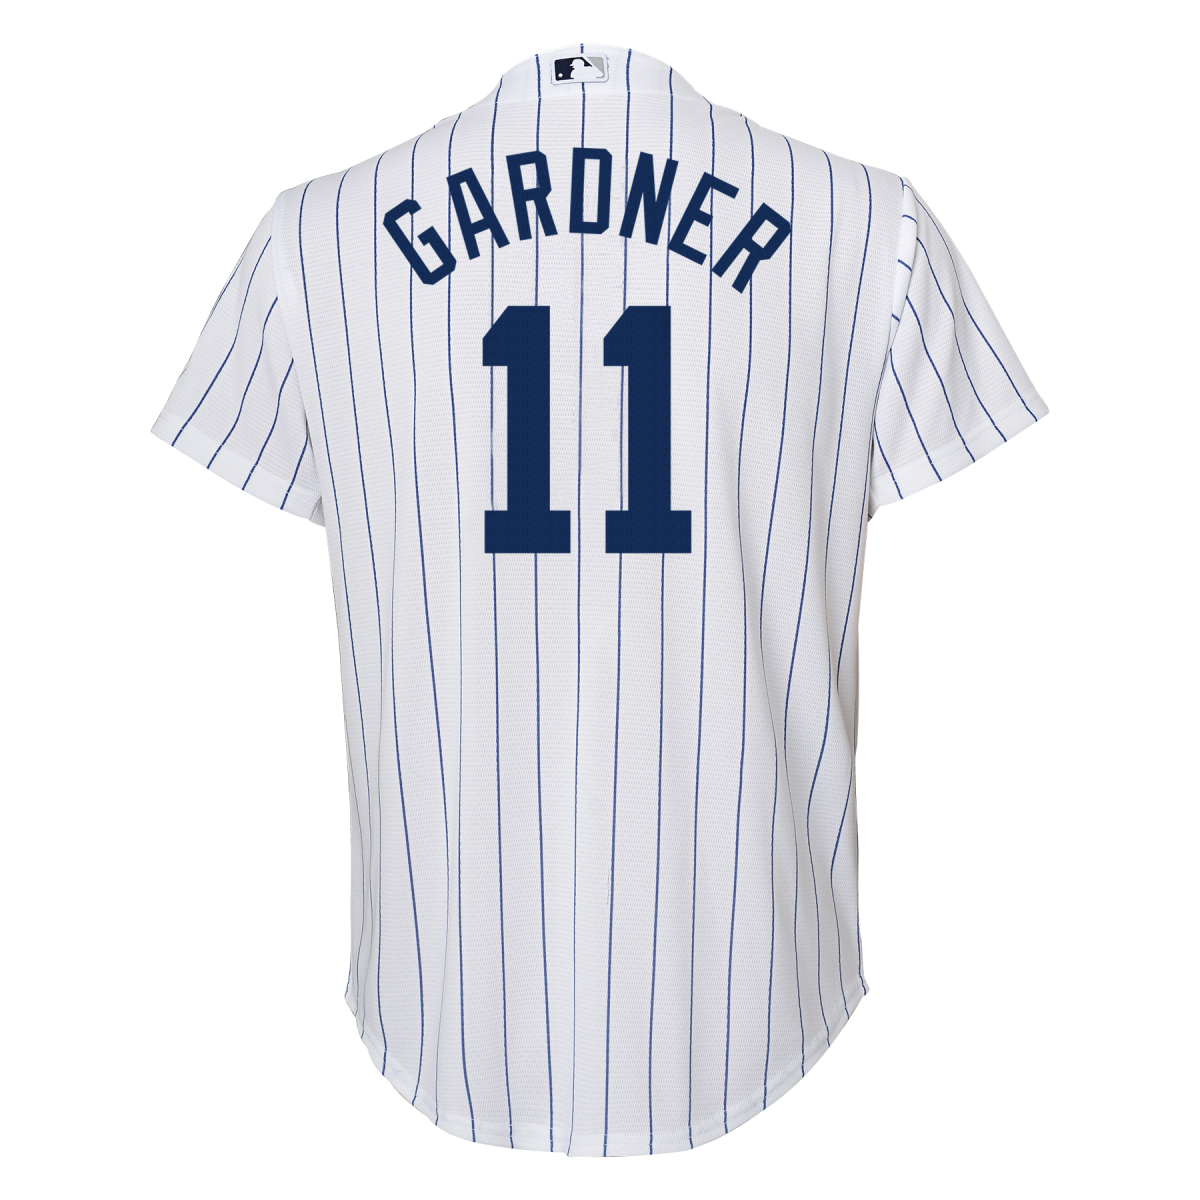 Brett Gardner #11 Yankees Jersey XL for Sale in Bethpage, NY - OfferUp